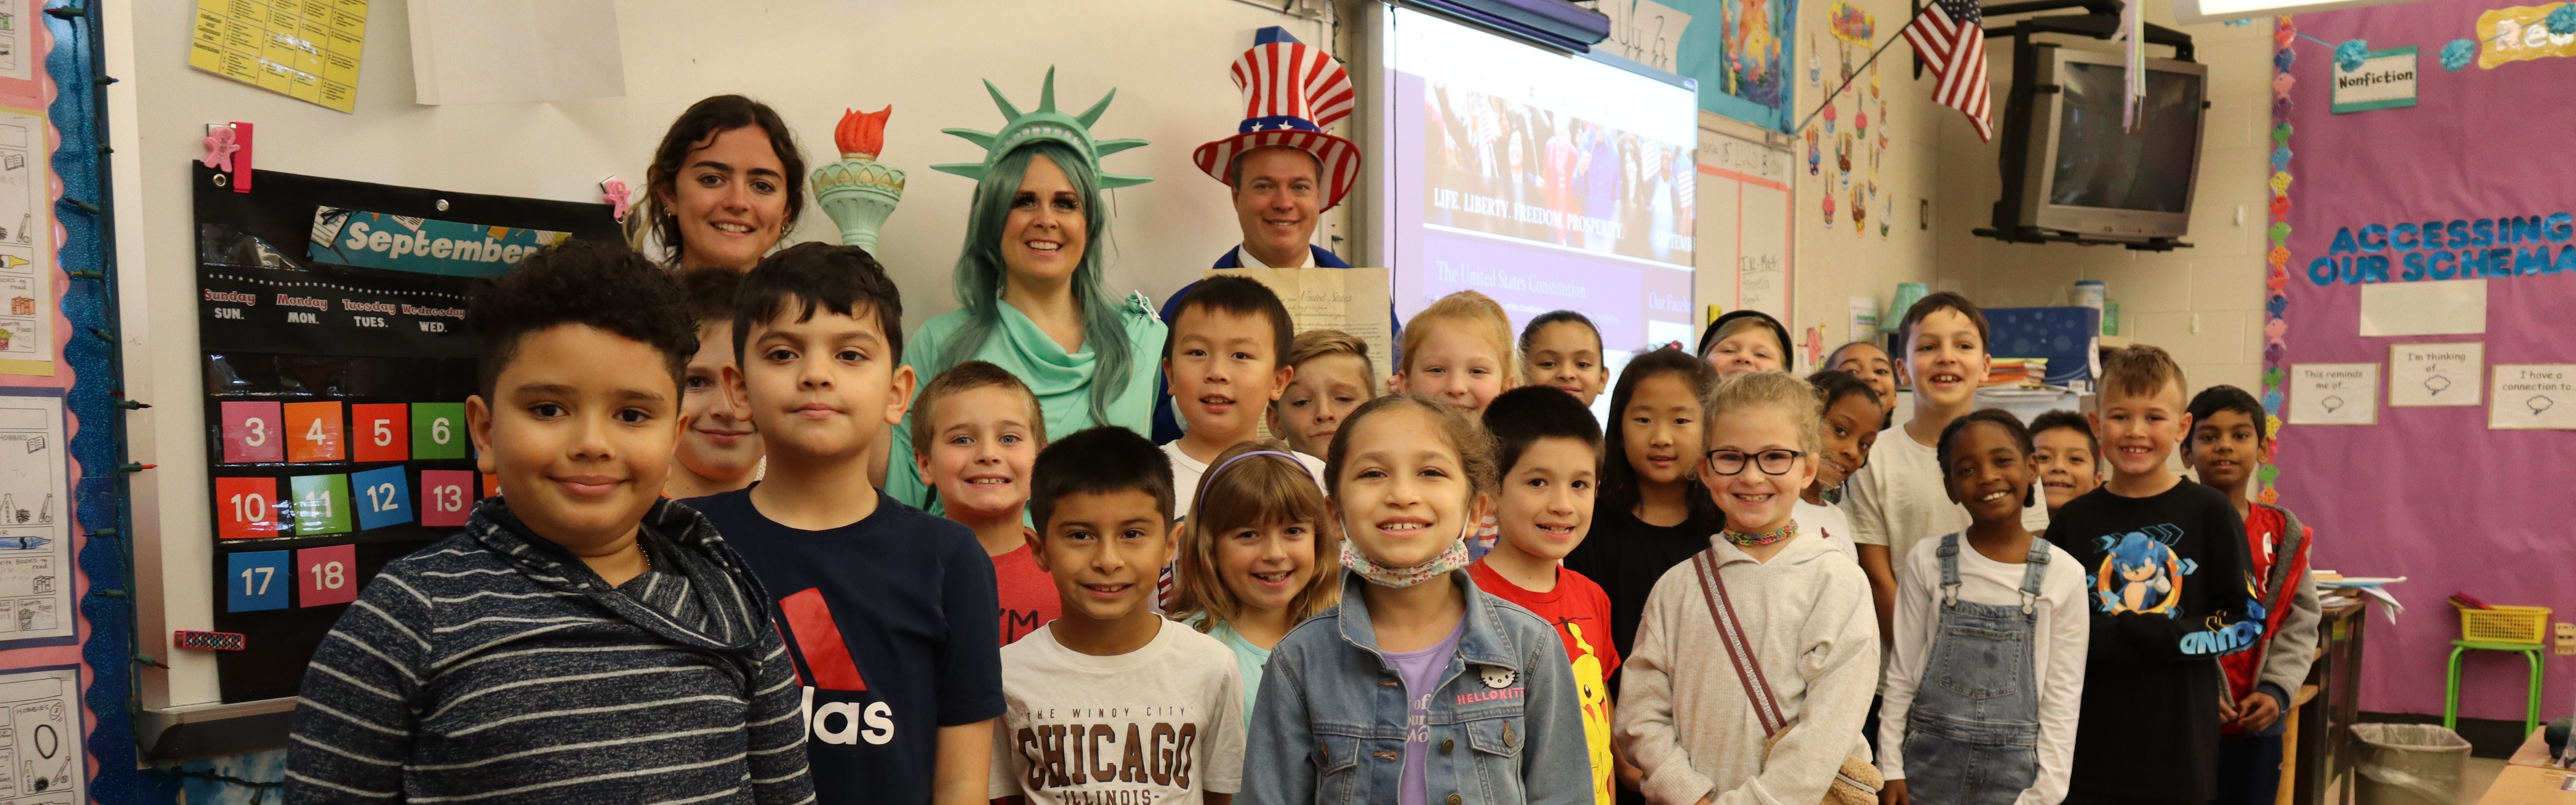 UMIS classroom poses with Ms. Rhoads and Dr. Bair on Constitution Day